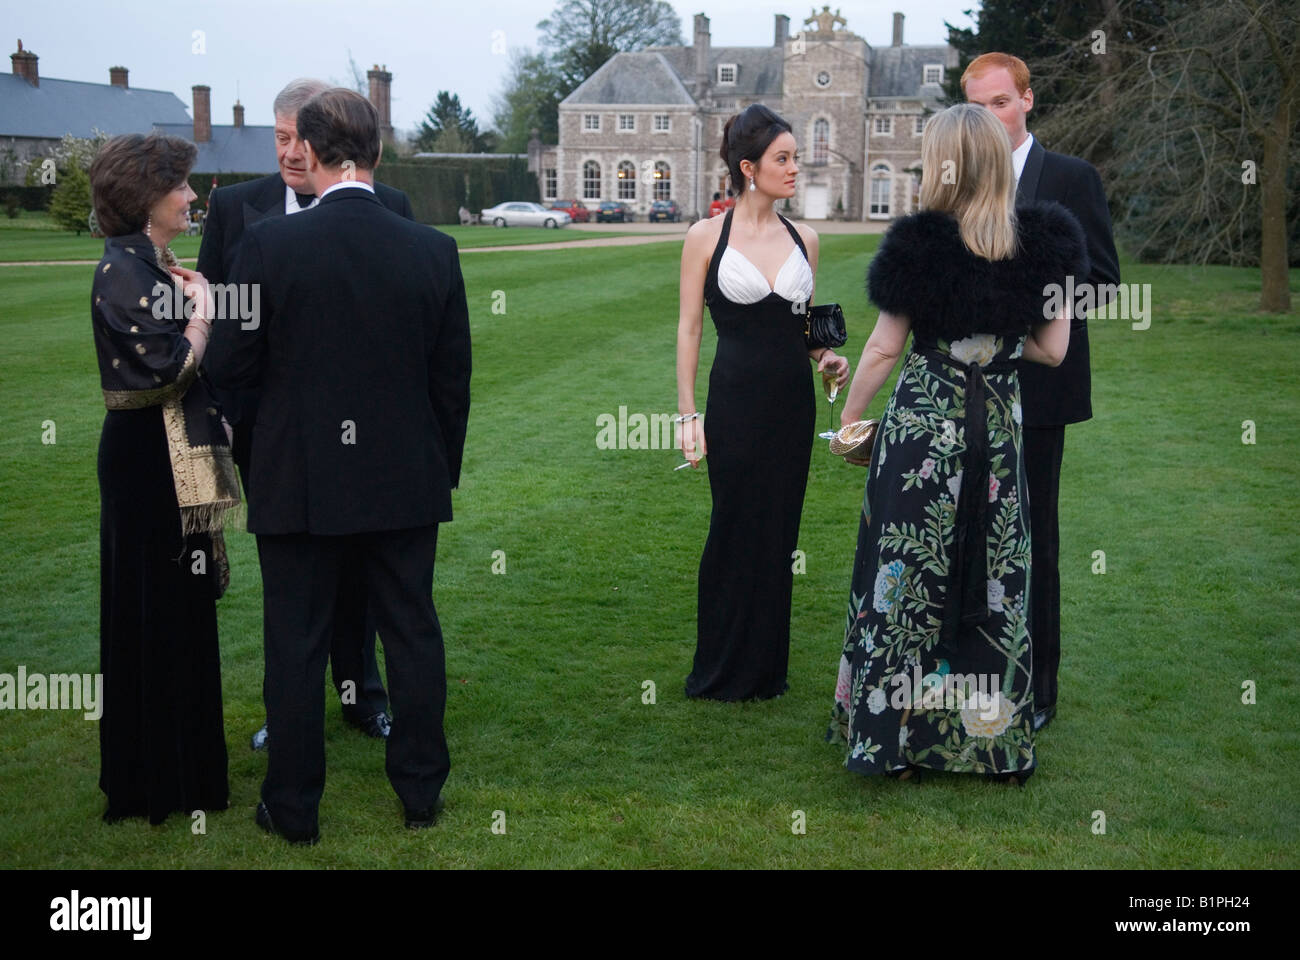 Private party black tie event wealthy smart posh people country house estate Hampshire UK 2008, 2000s Stock Photo